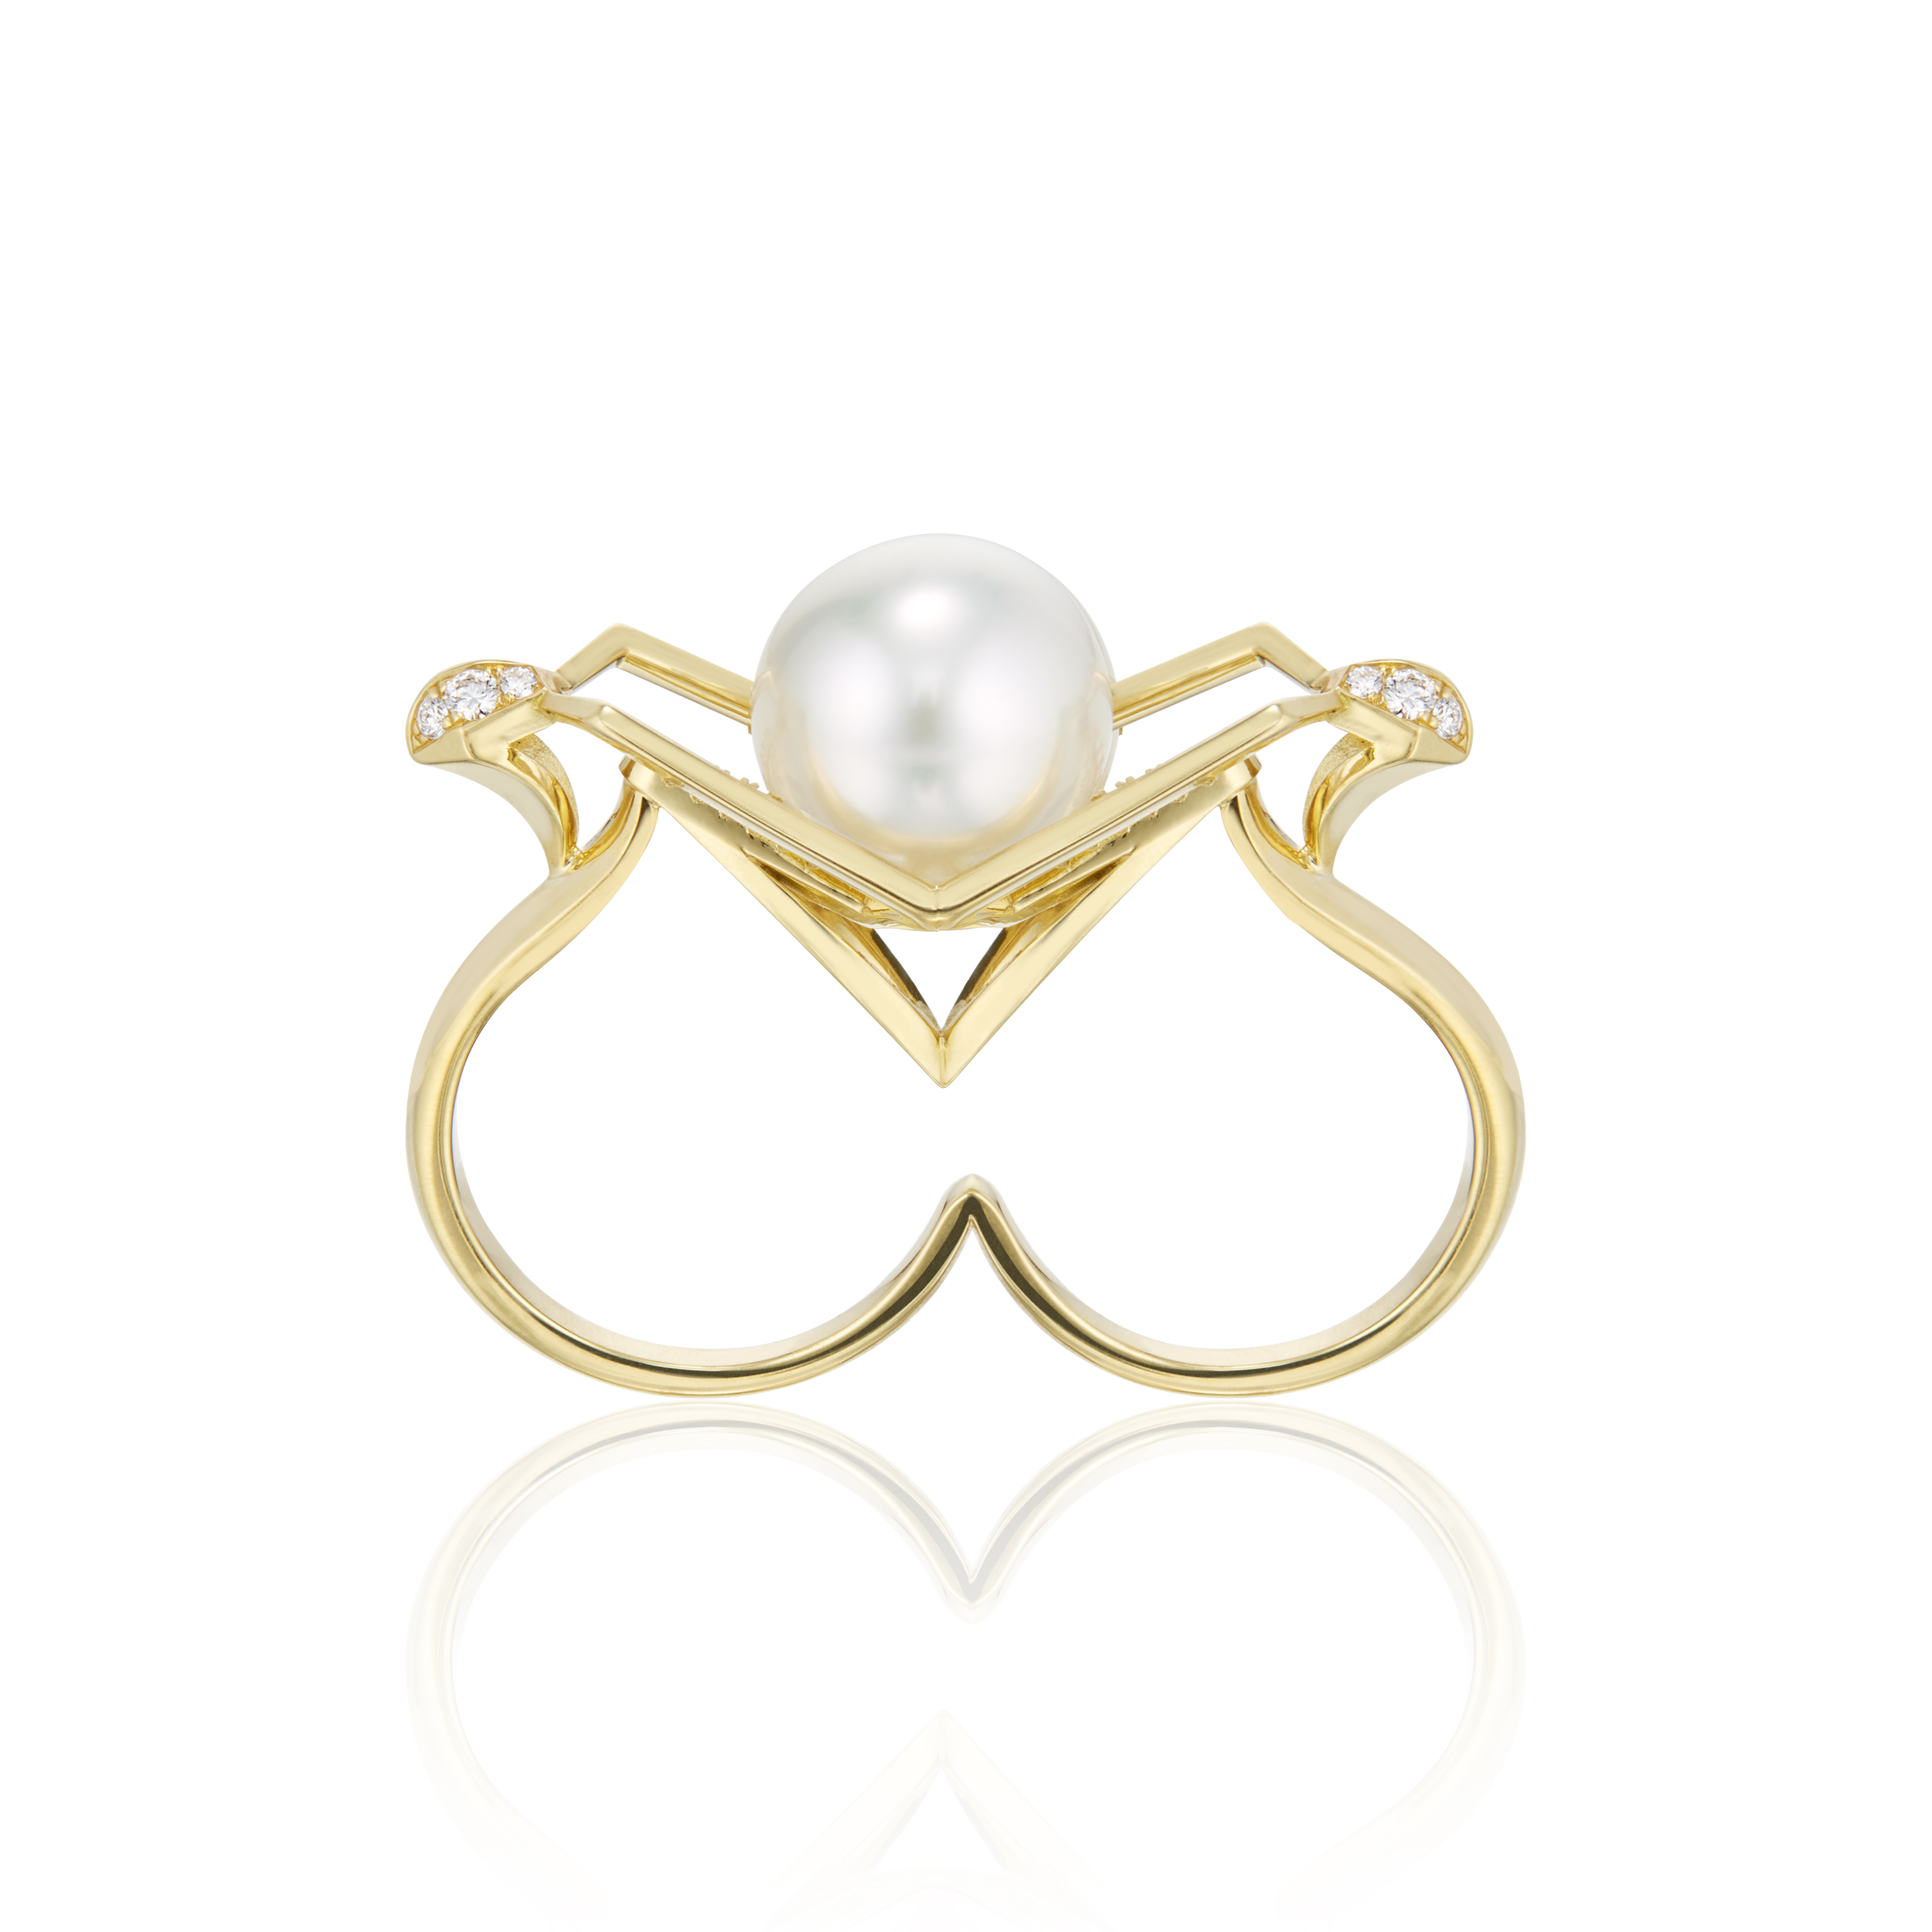 This is a frontal view of the Renisis Halo Lotus Double Ring. It's large pearl and dramatic and sharply angled triangular setting setting is is in full view. You can also see clearly the double ring designed for two adjacent fingers.